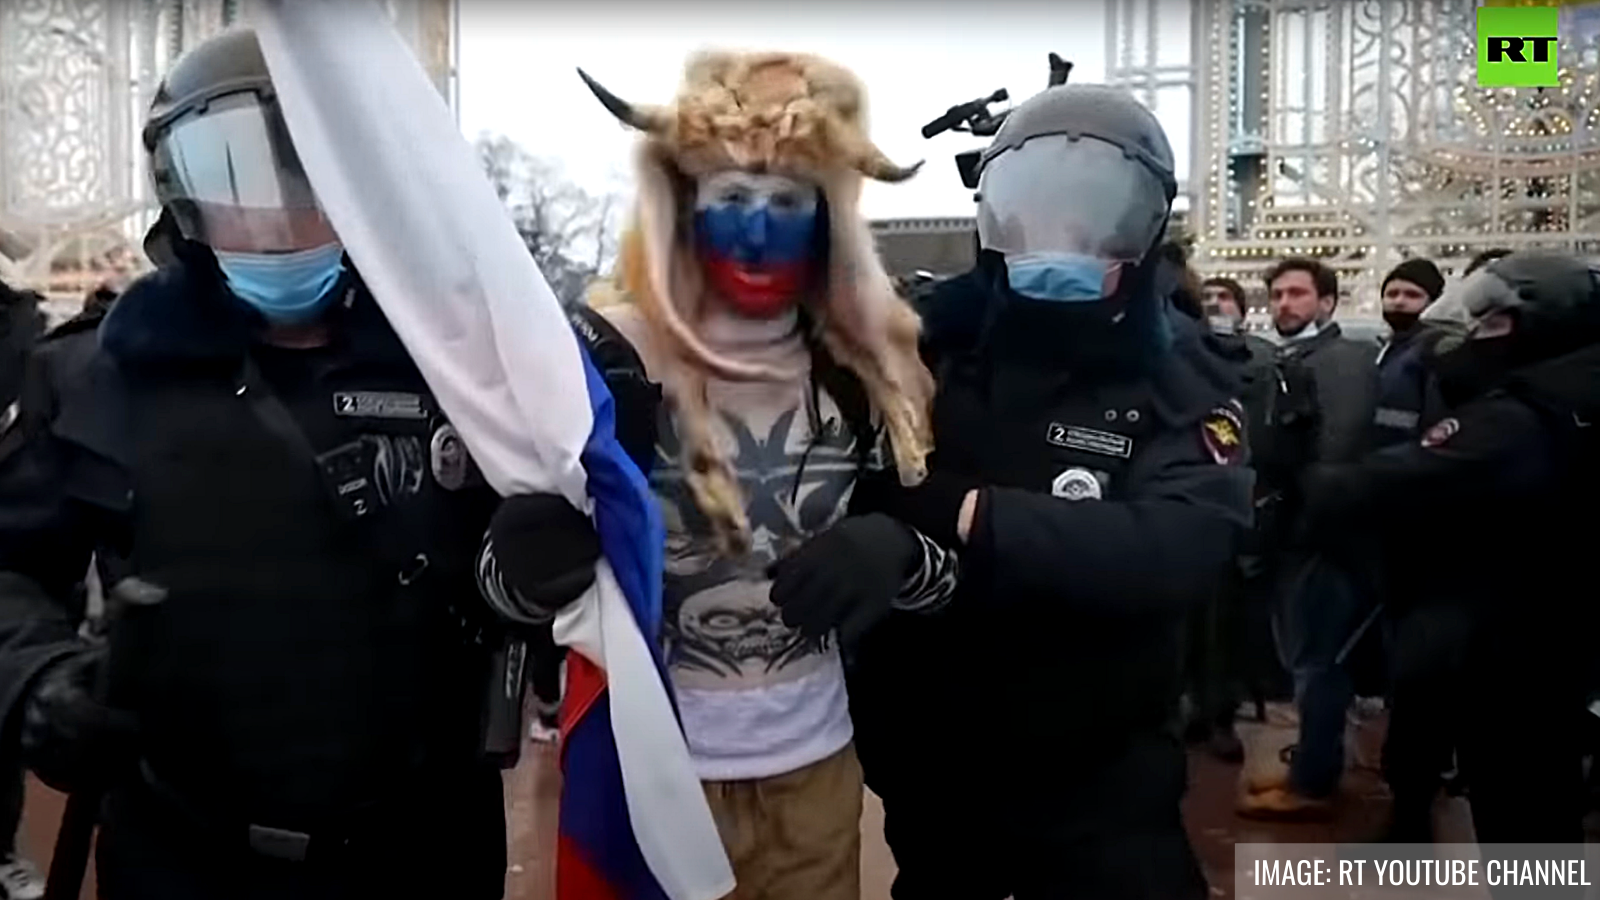 Detained protester in Moscow. Image: RT YouTube channel.